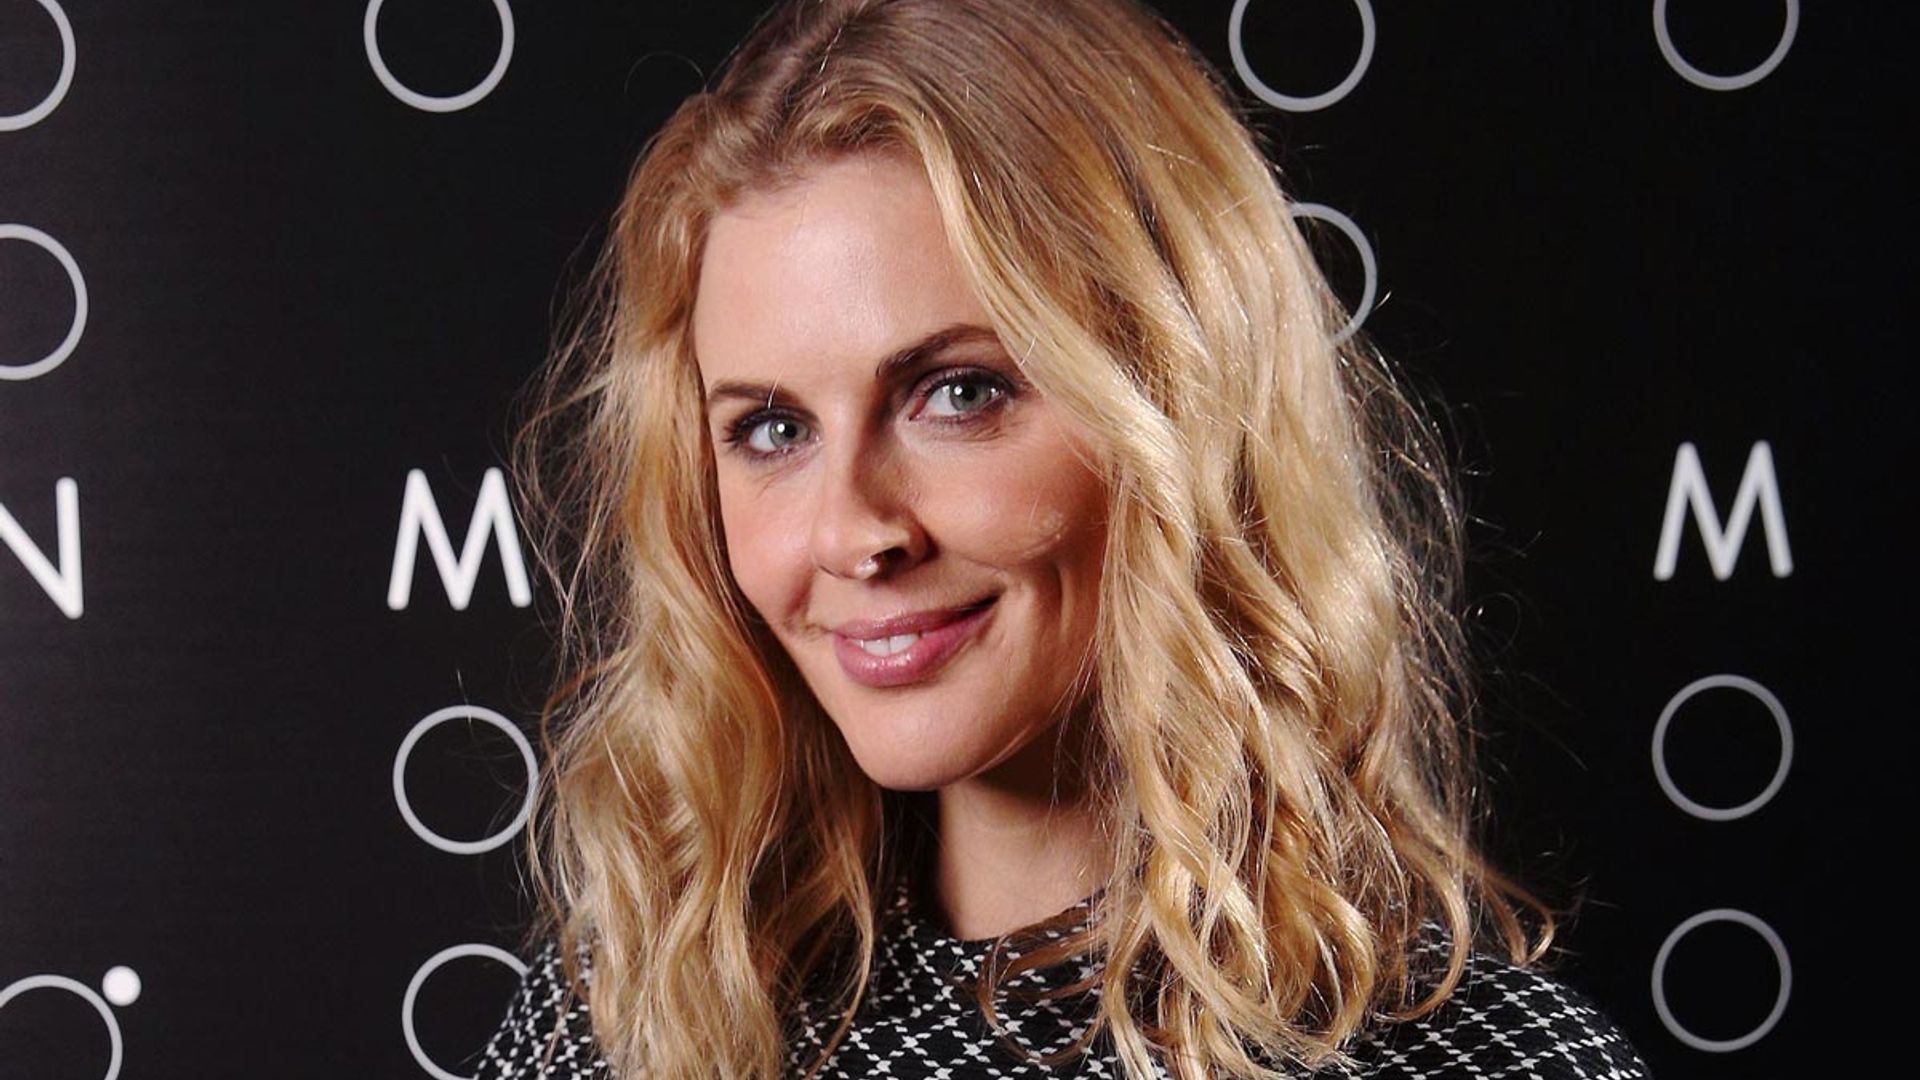 The Split's Donna Air stuns in a checked dress from Kate Middleton's favourite designer